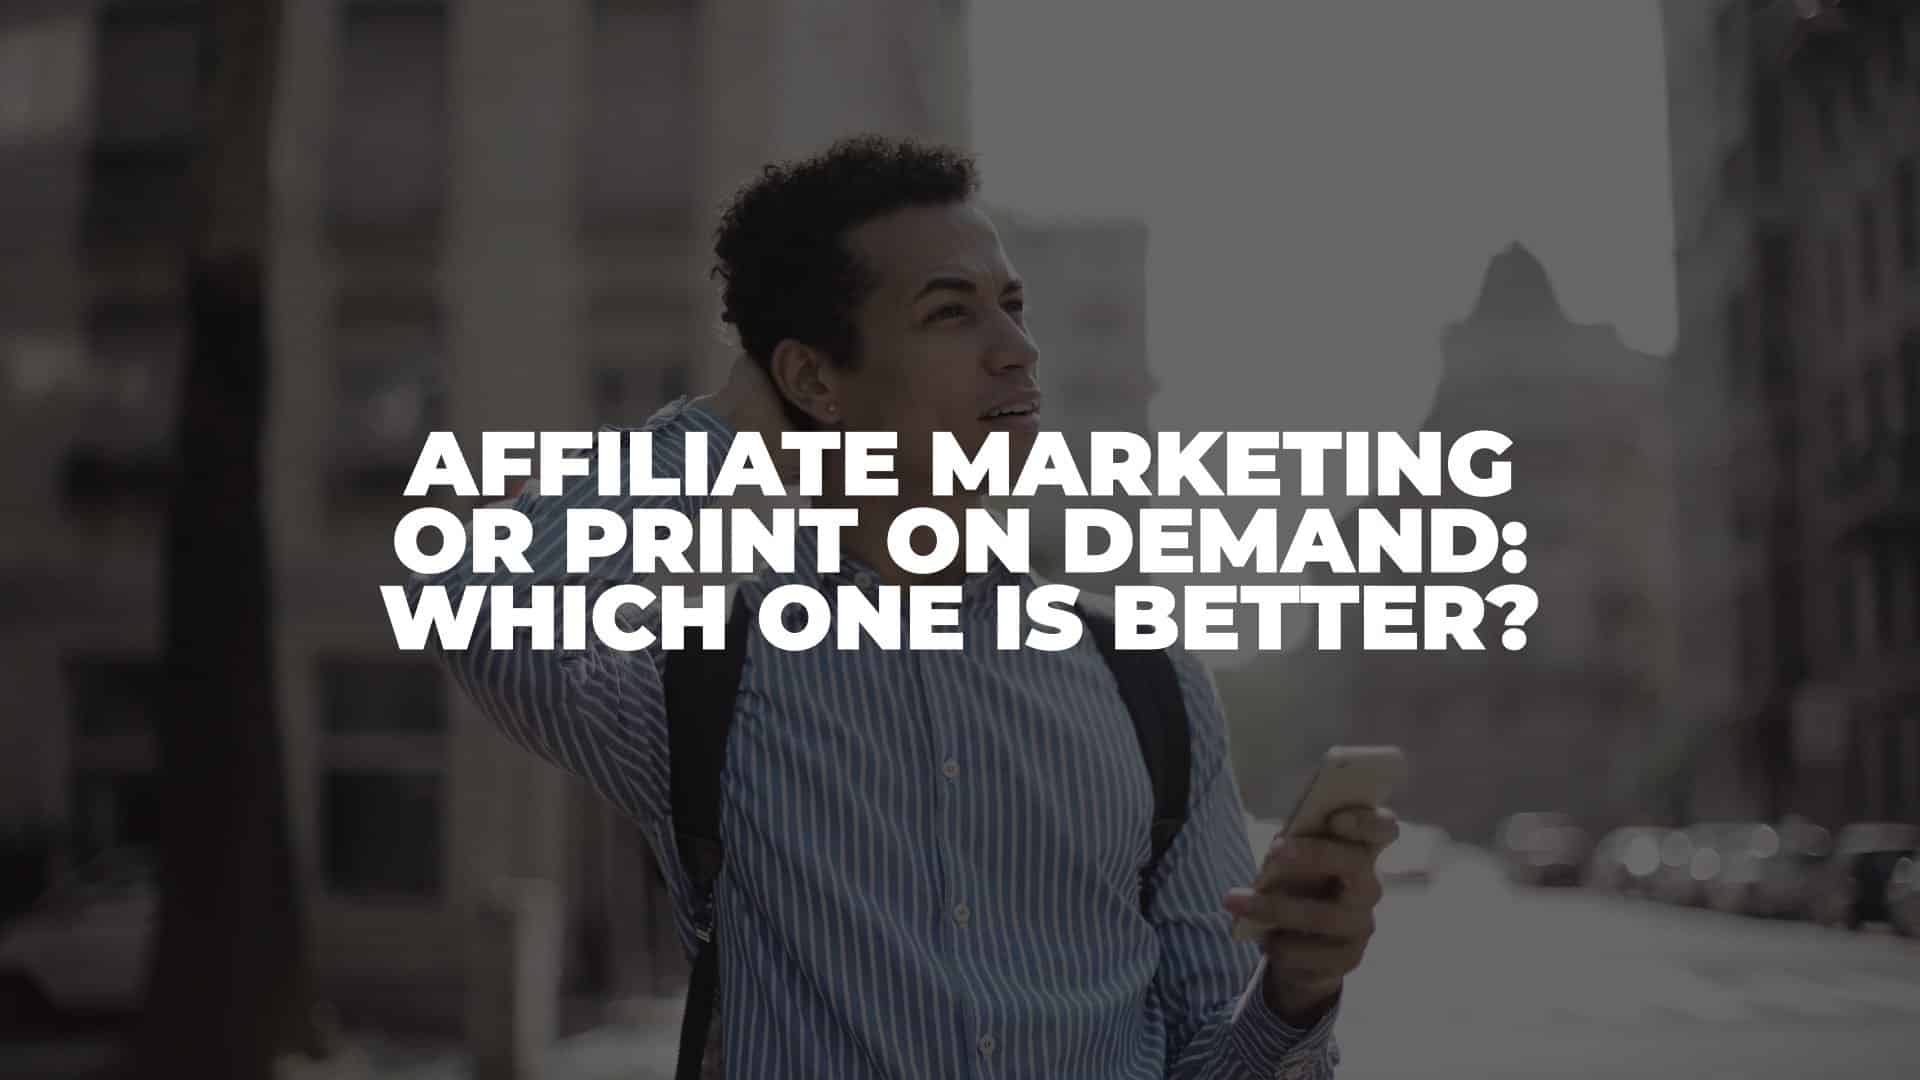 Affiliate Marketing or Print on Demand - Featured Image